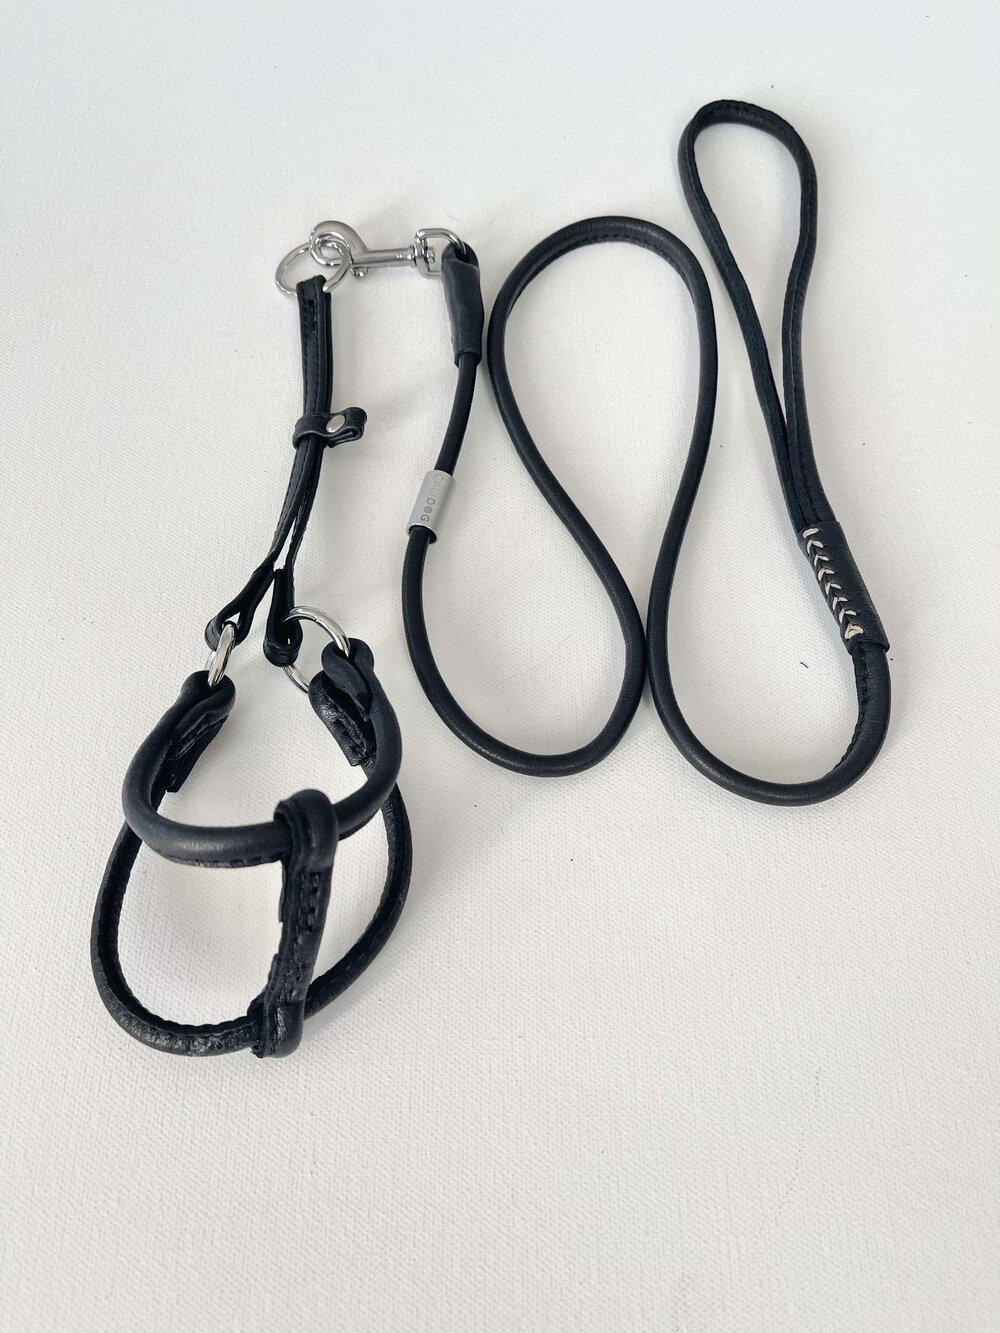 Black Rolled Leather Dog Leash and Harness Set | Buy Now Online — CALIDOG